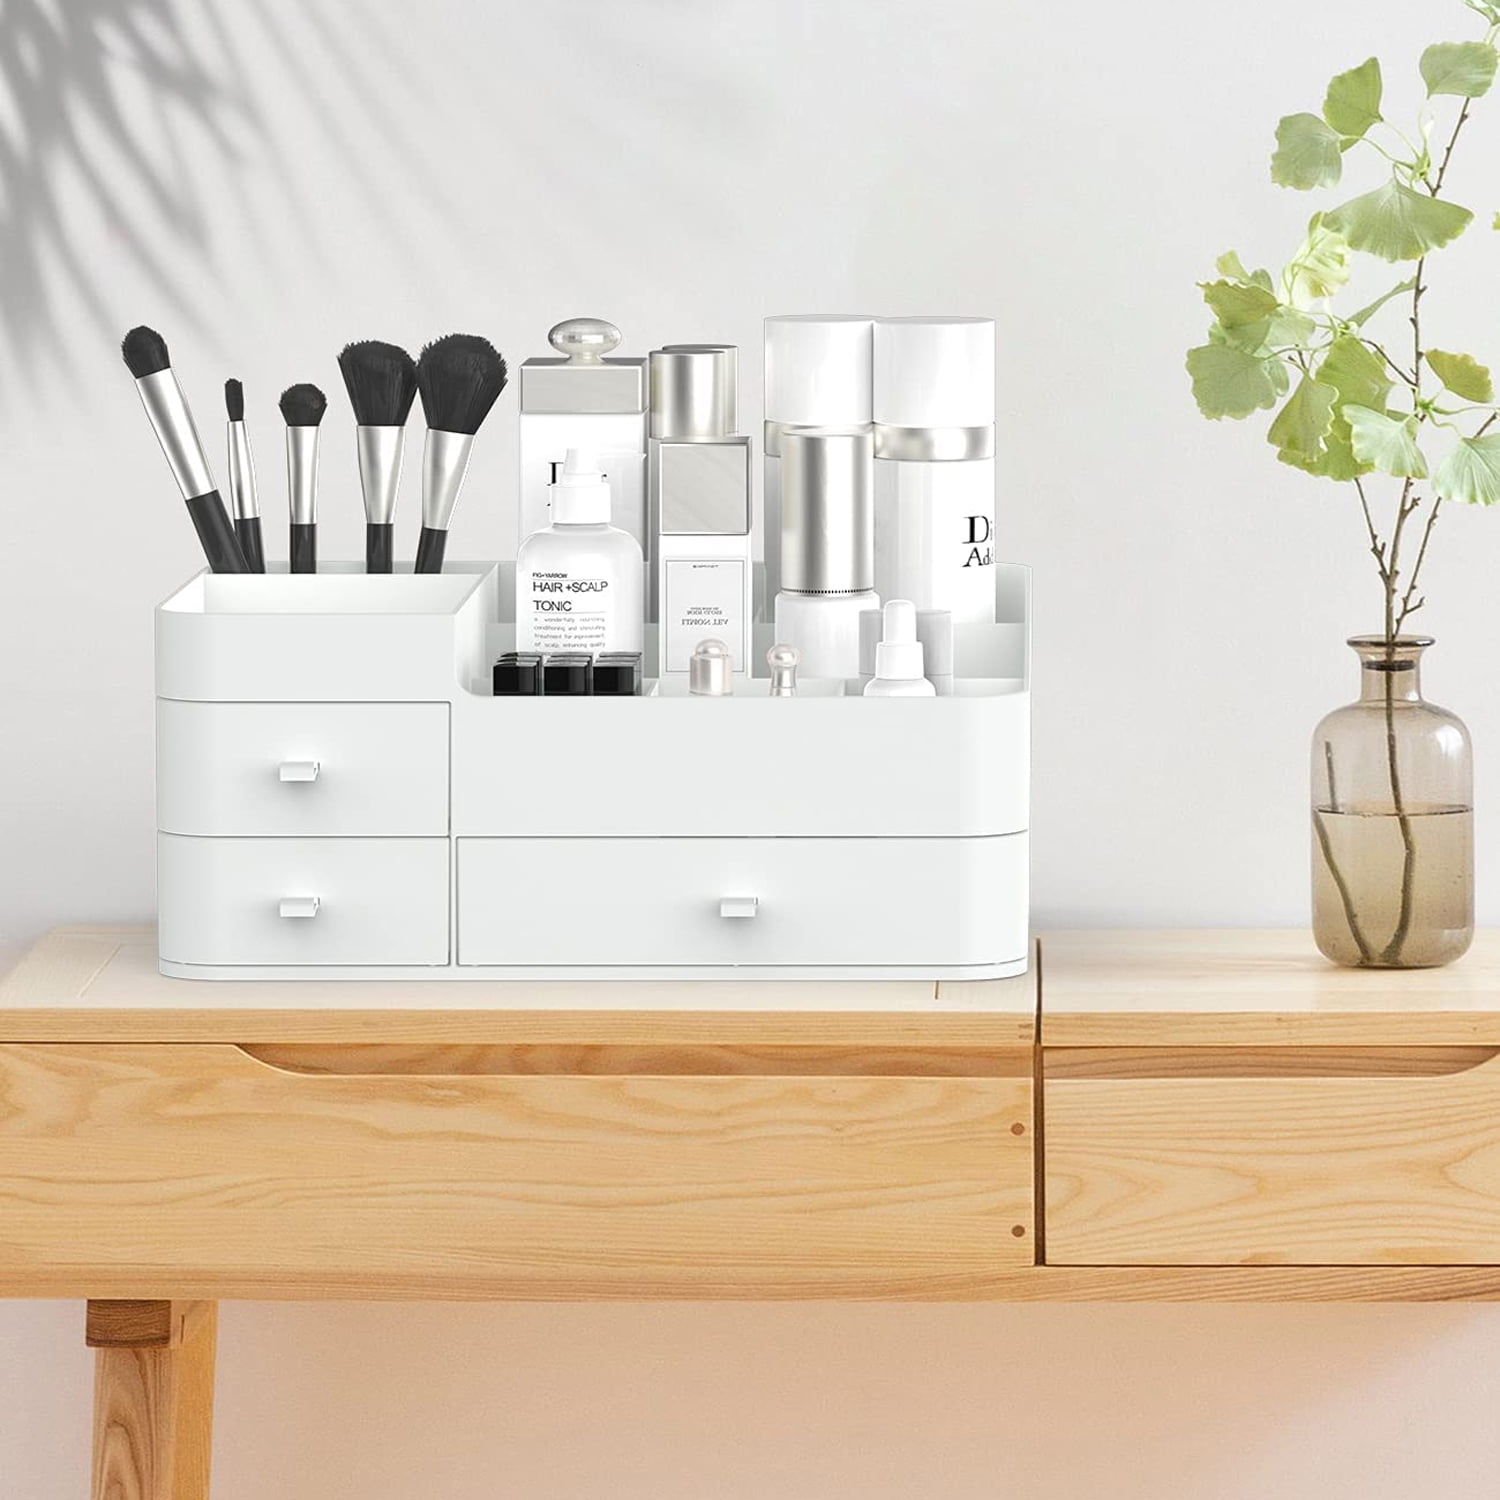 kulusion Desk Organizer-3 Tier Stackable Storage Drawers with 6  Compartments White Stackable Great for Makeup, Bathroom Organization  Accessories Etc